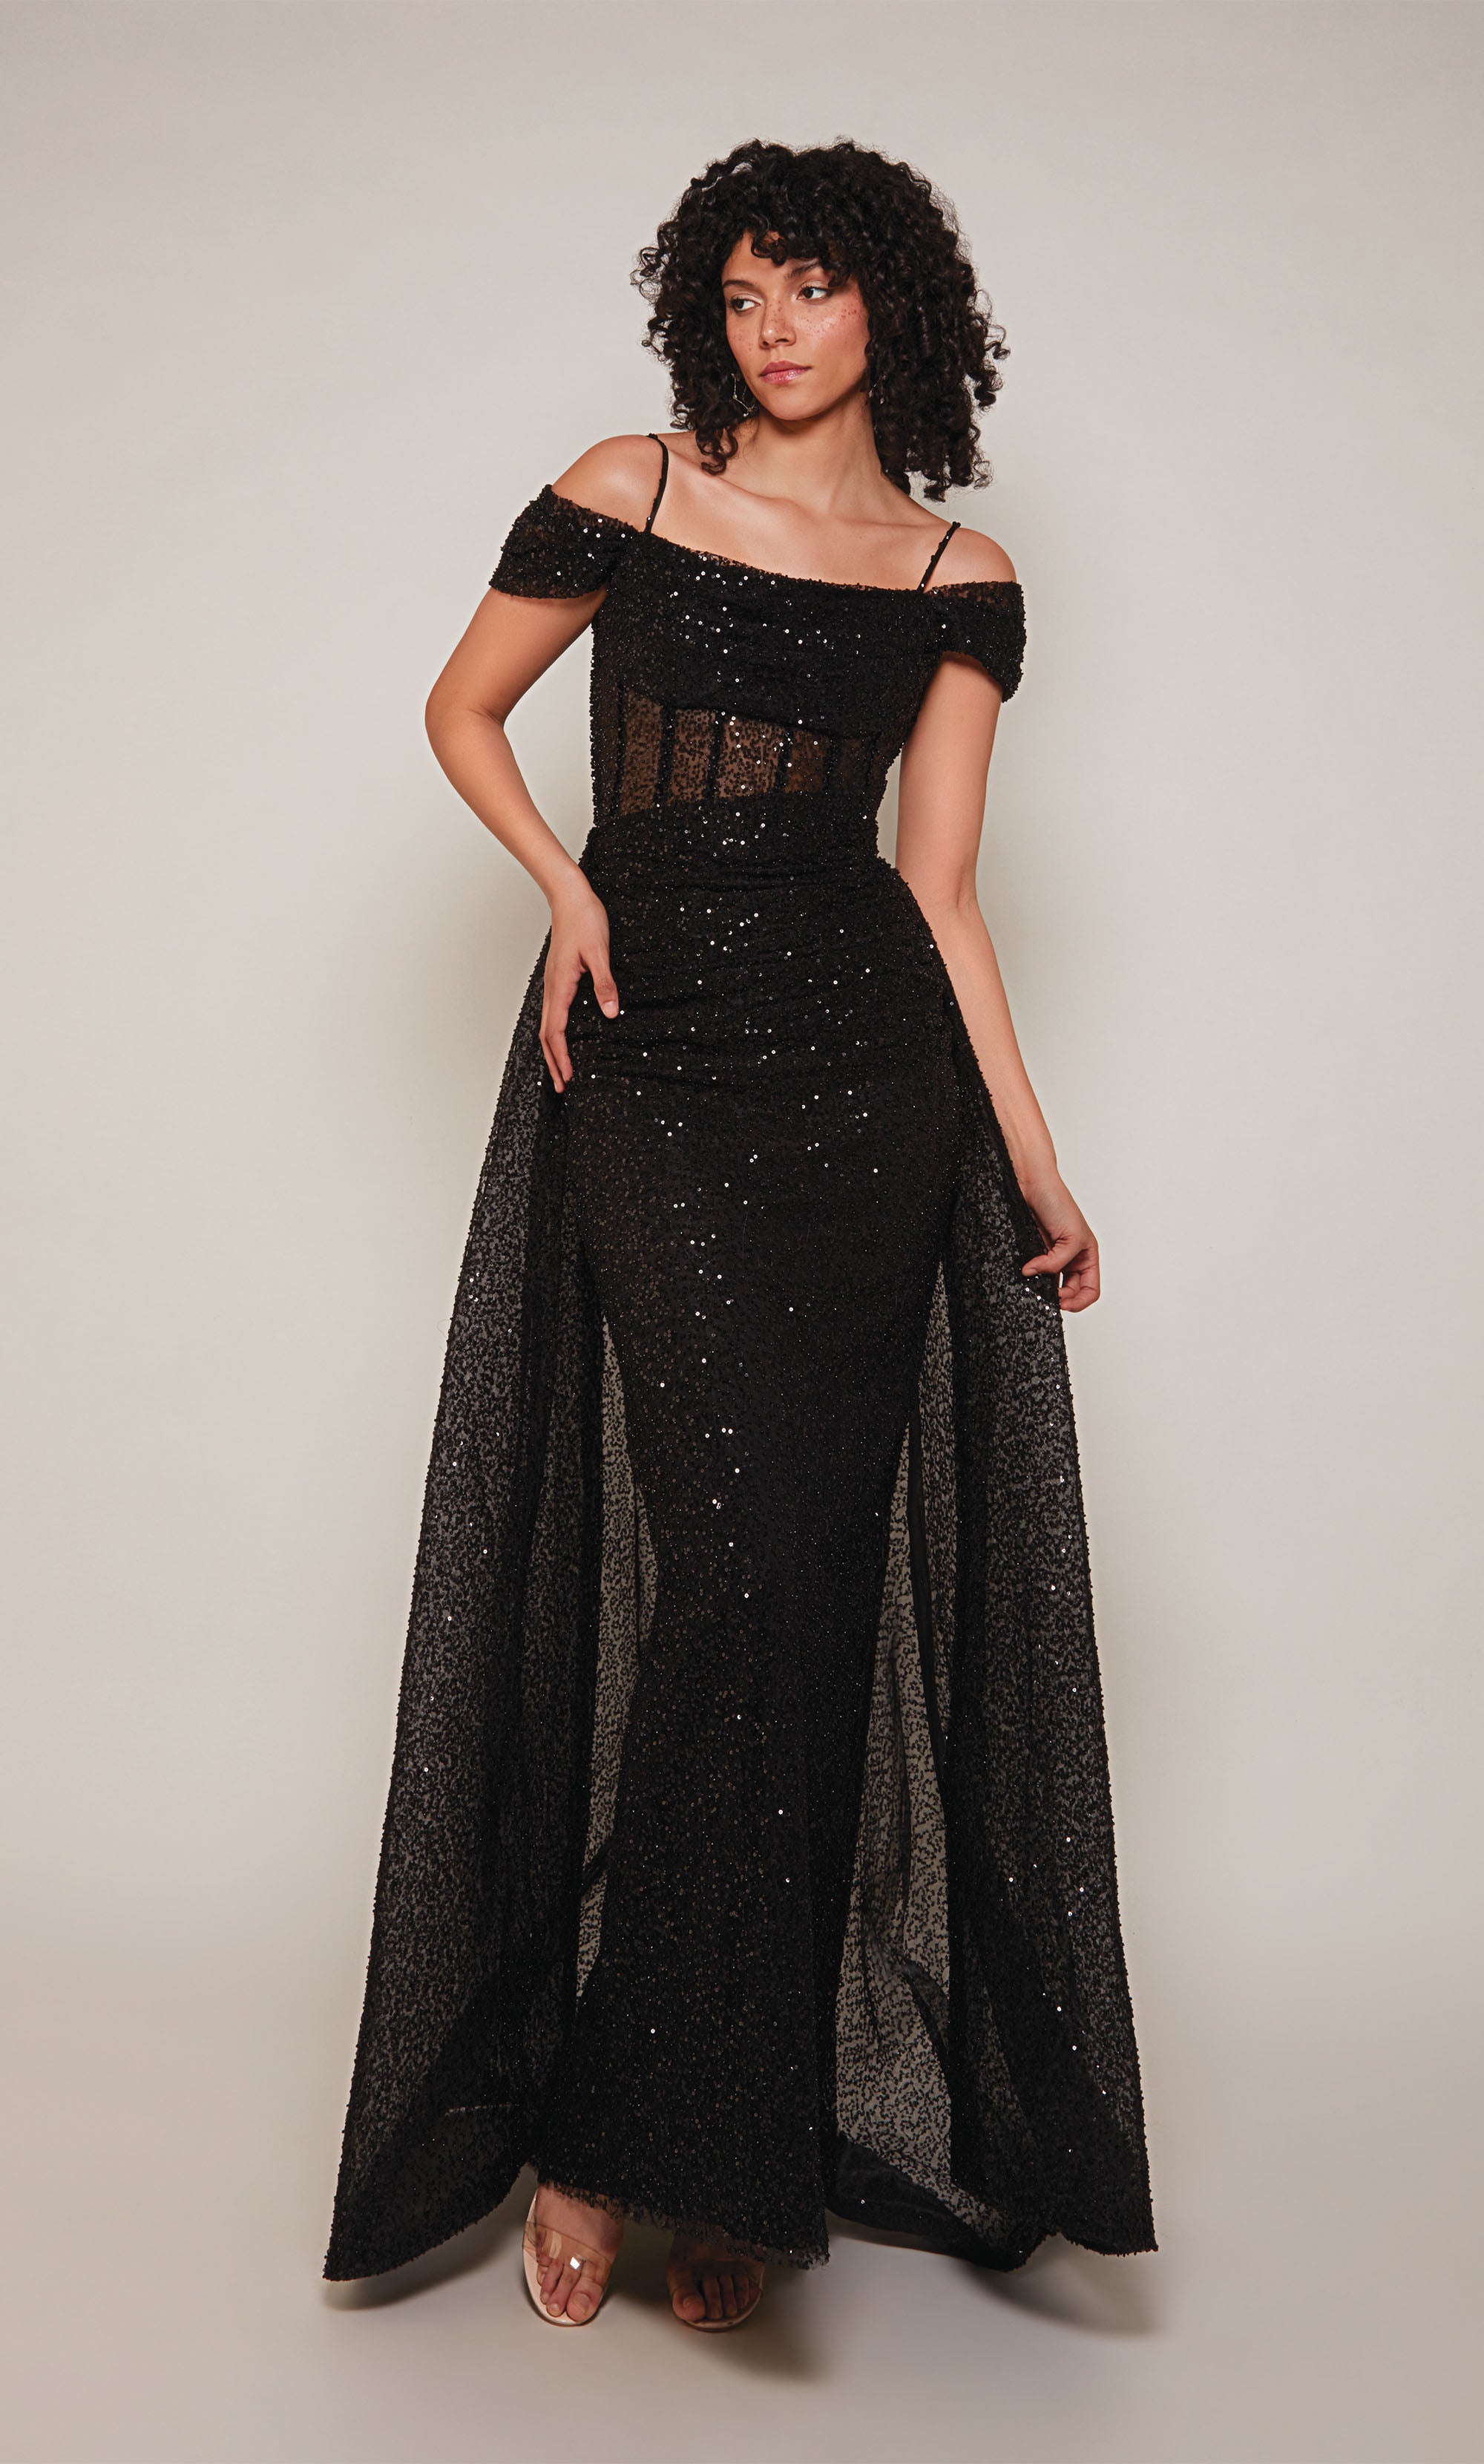 A chic, black corset wedding dress in beaded tulle. The highlights of the dress are an off-the-shoulder neckline with thin spaghetti straps, a sheer bodice, and a fitted skirt. The overskirt adds the perfect amount of sophisticated drama.